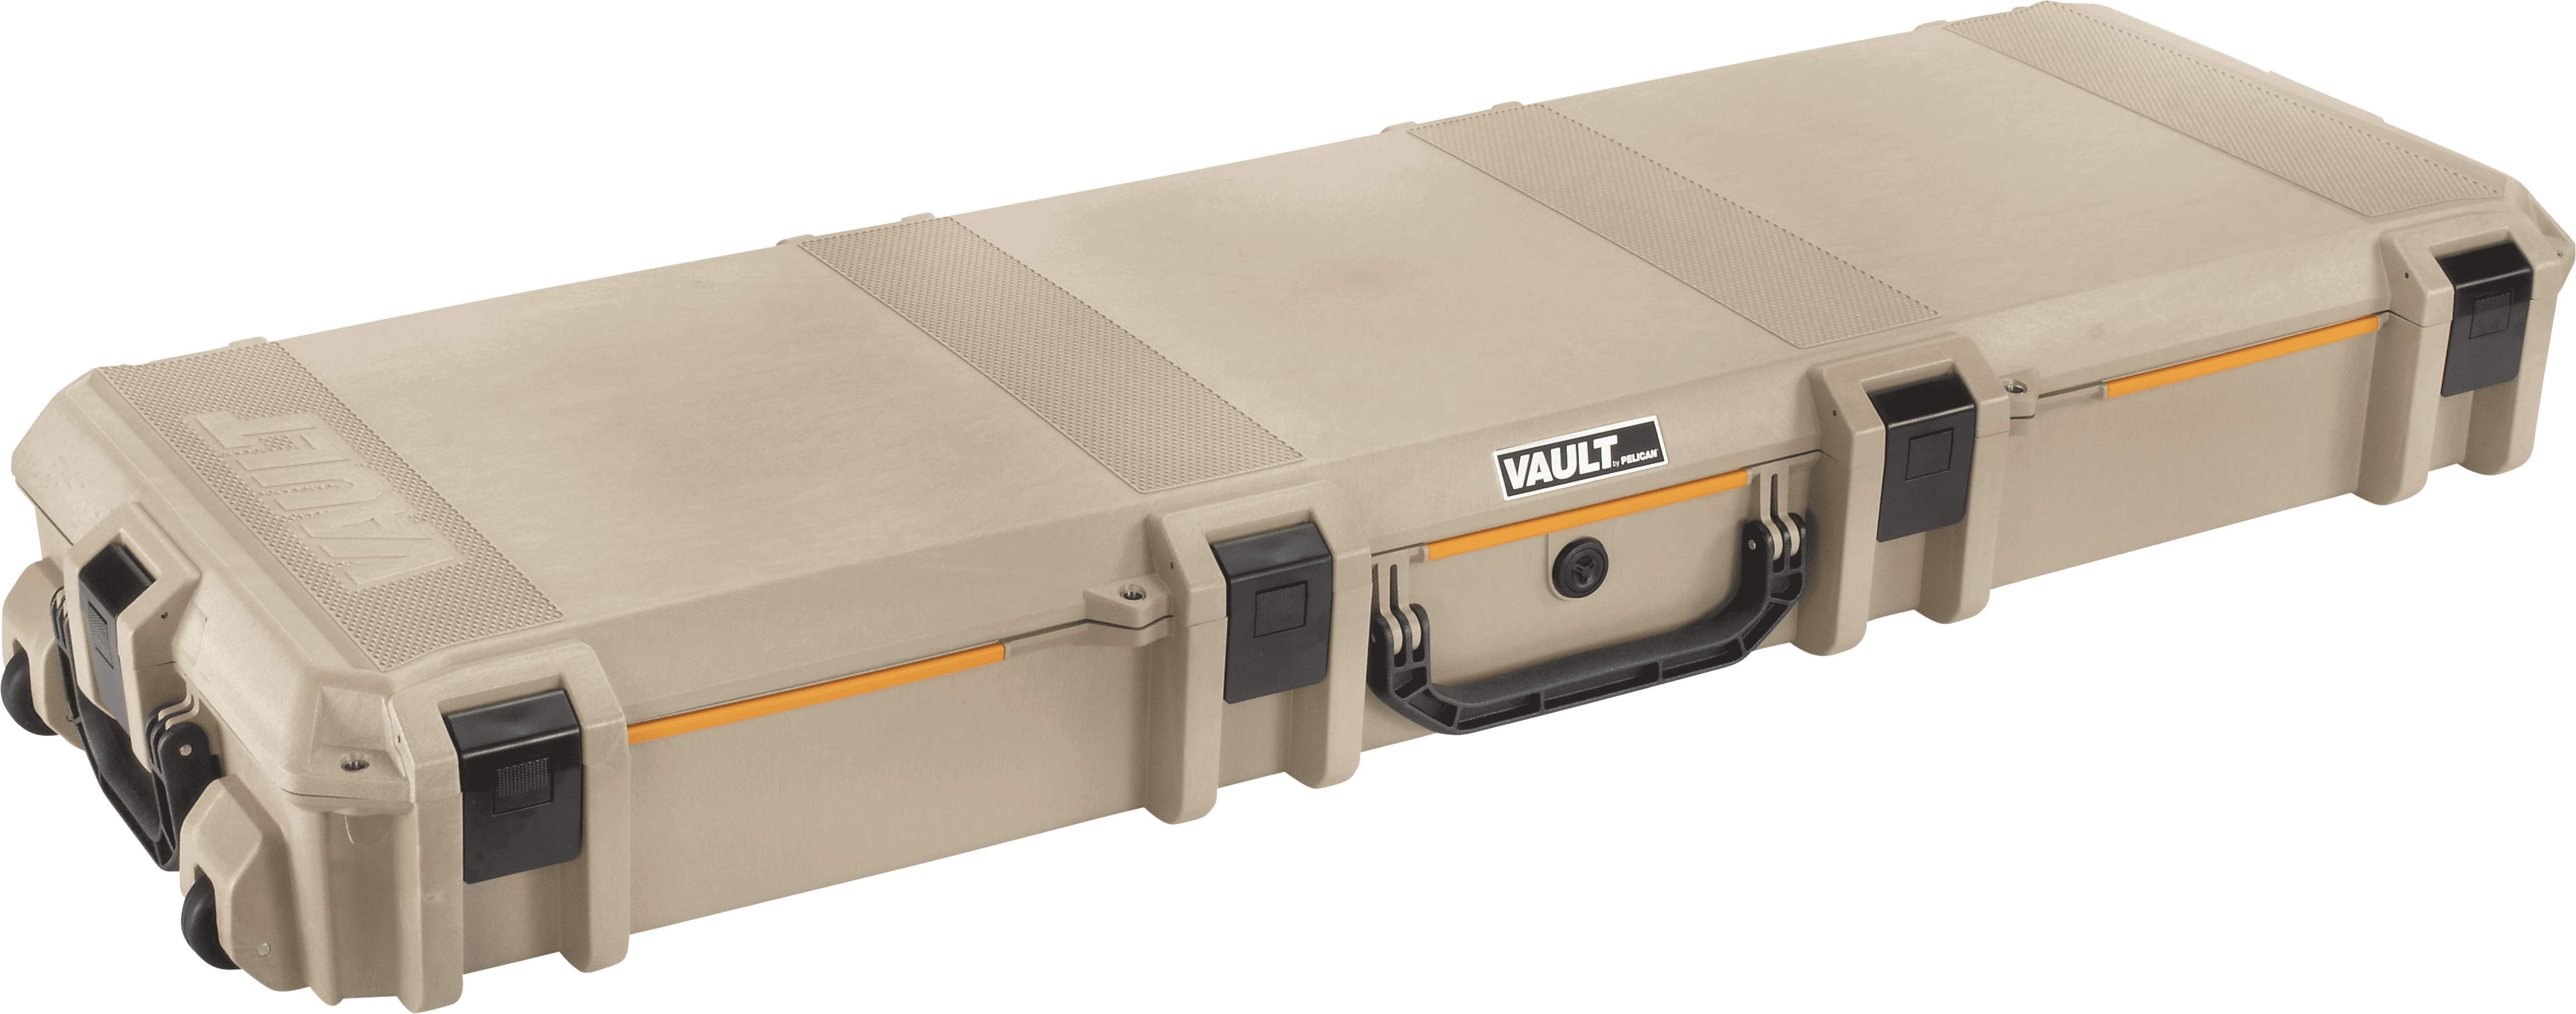 Pelican Products V800 Vault Double Rifle Case - Tan